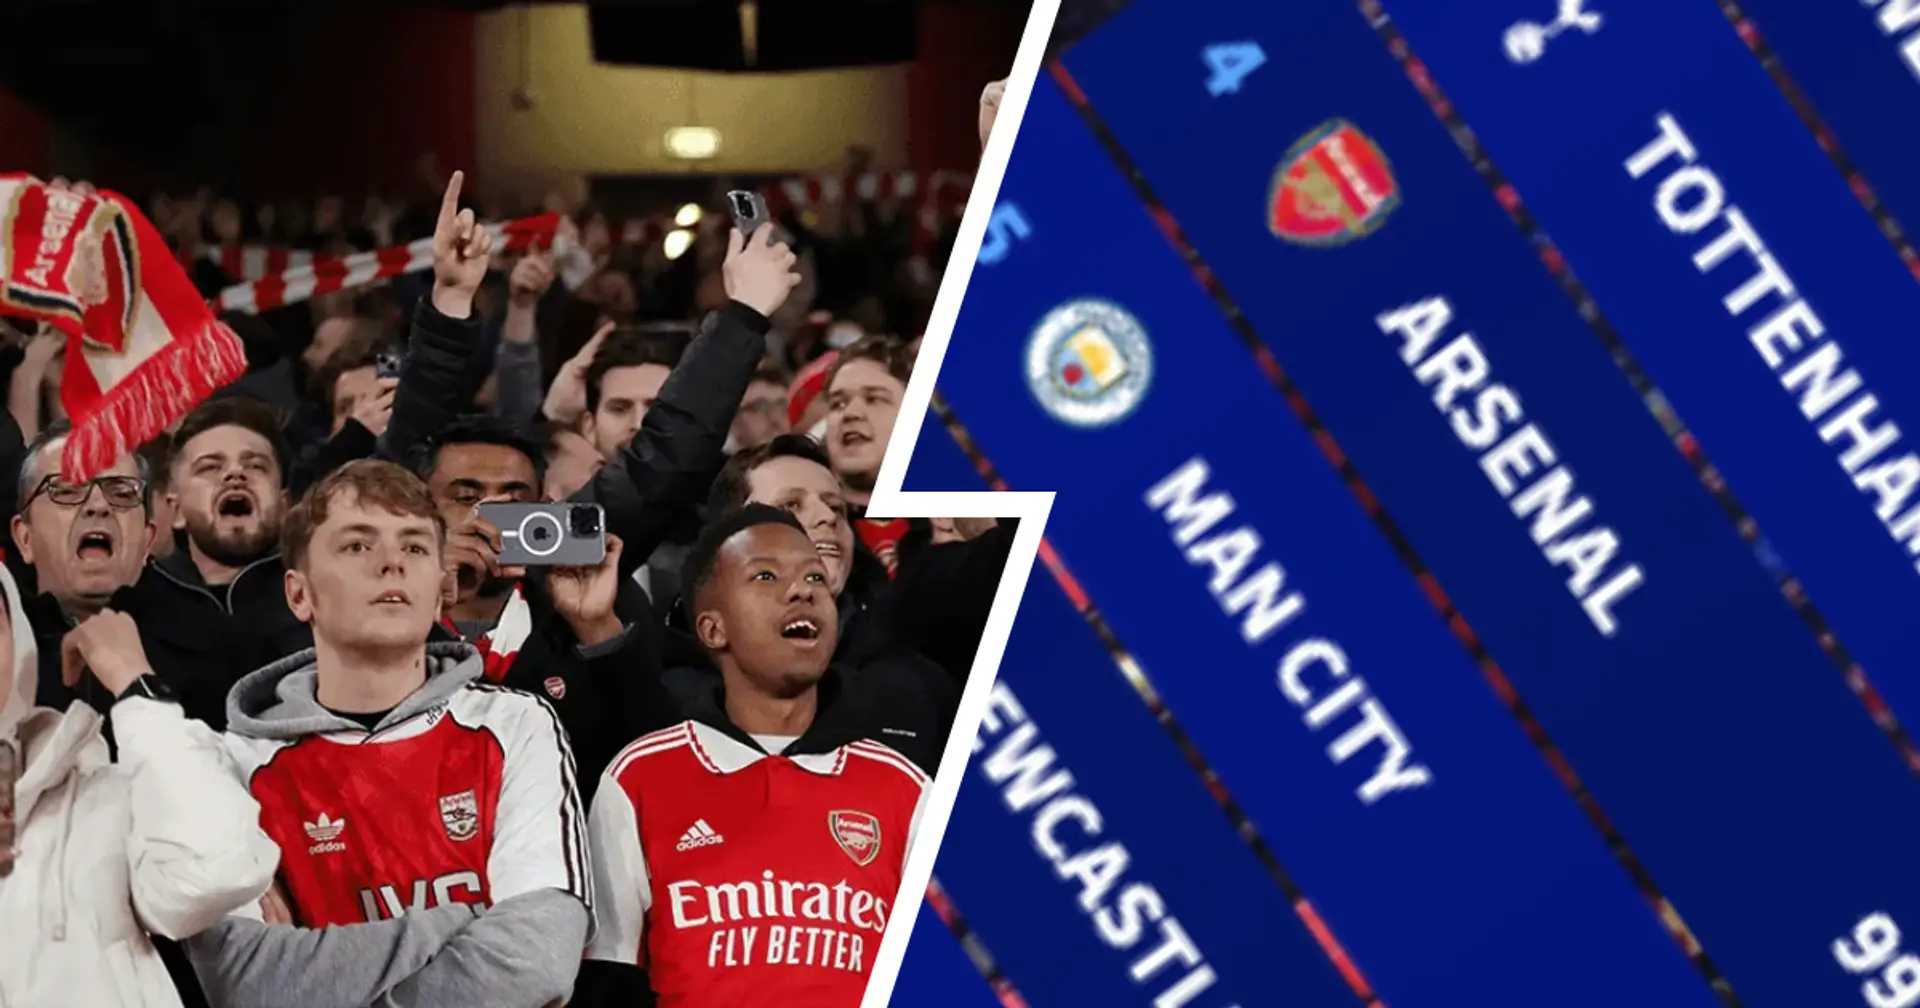 Highest attendance in the Premier League this season: Arsenal behind two London clubs